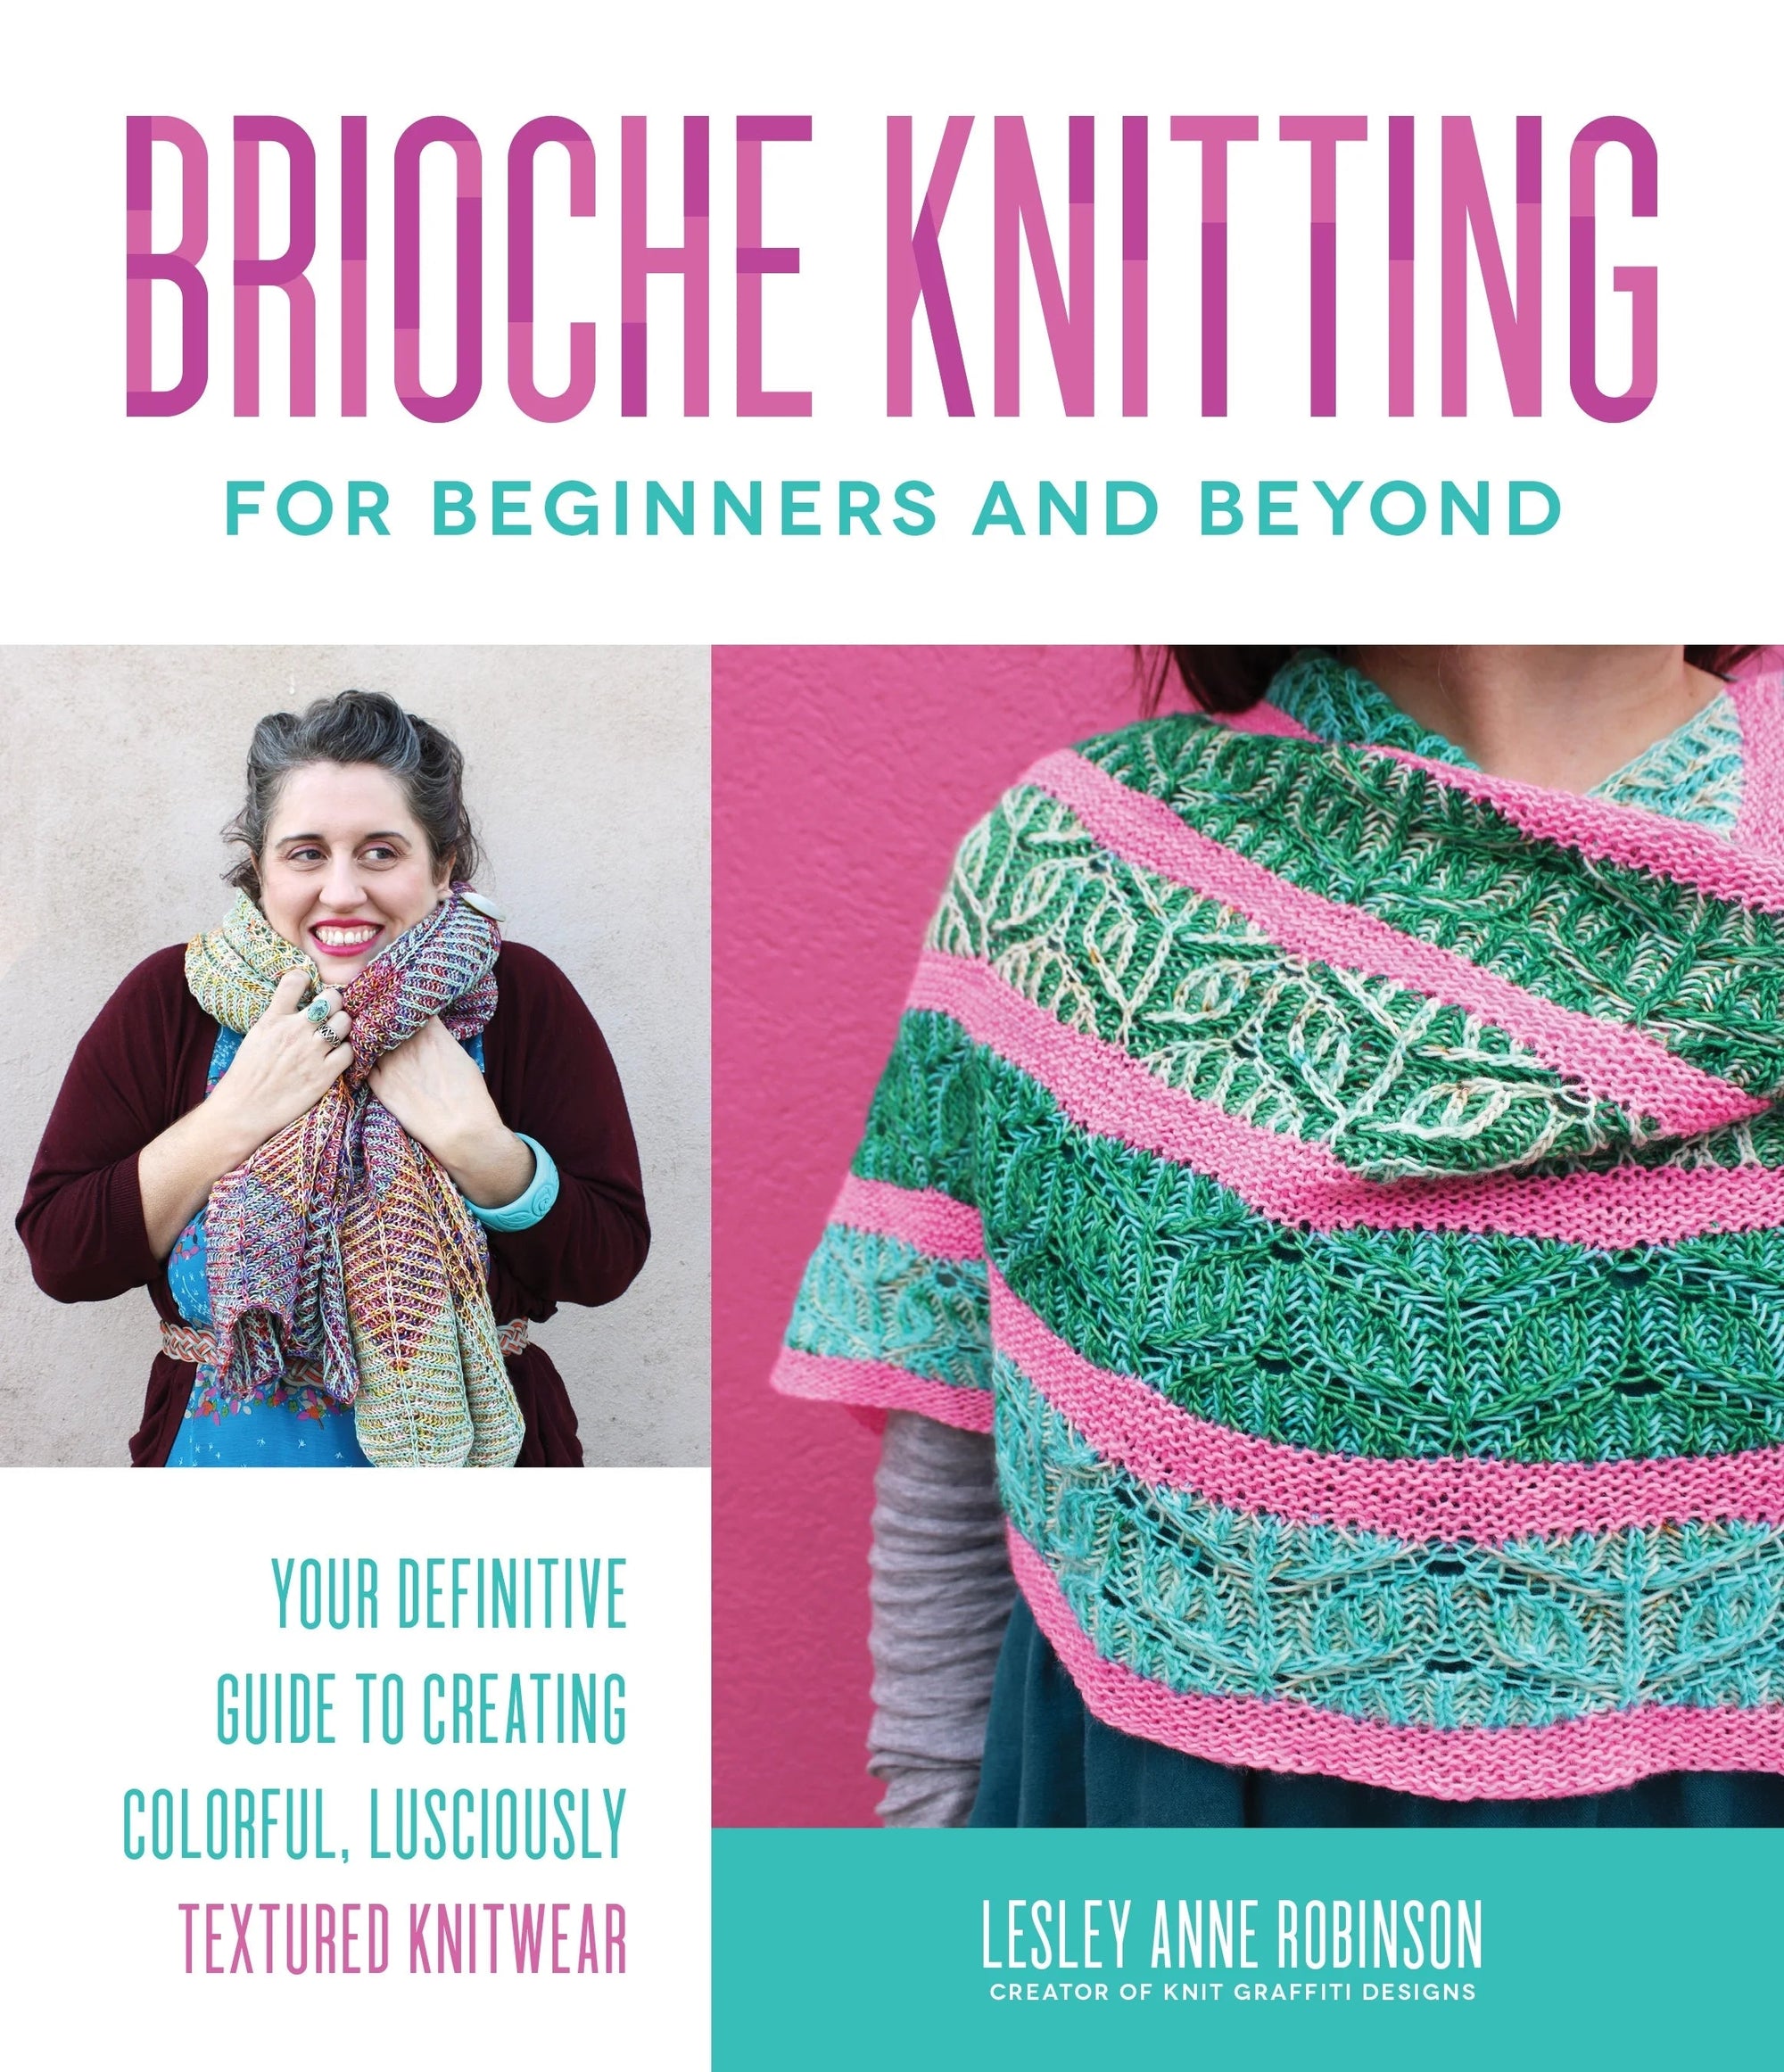 Brioche Knitting for Beginners and Beyond - Lesley Anne Robinson - The Little Yarn Store